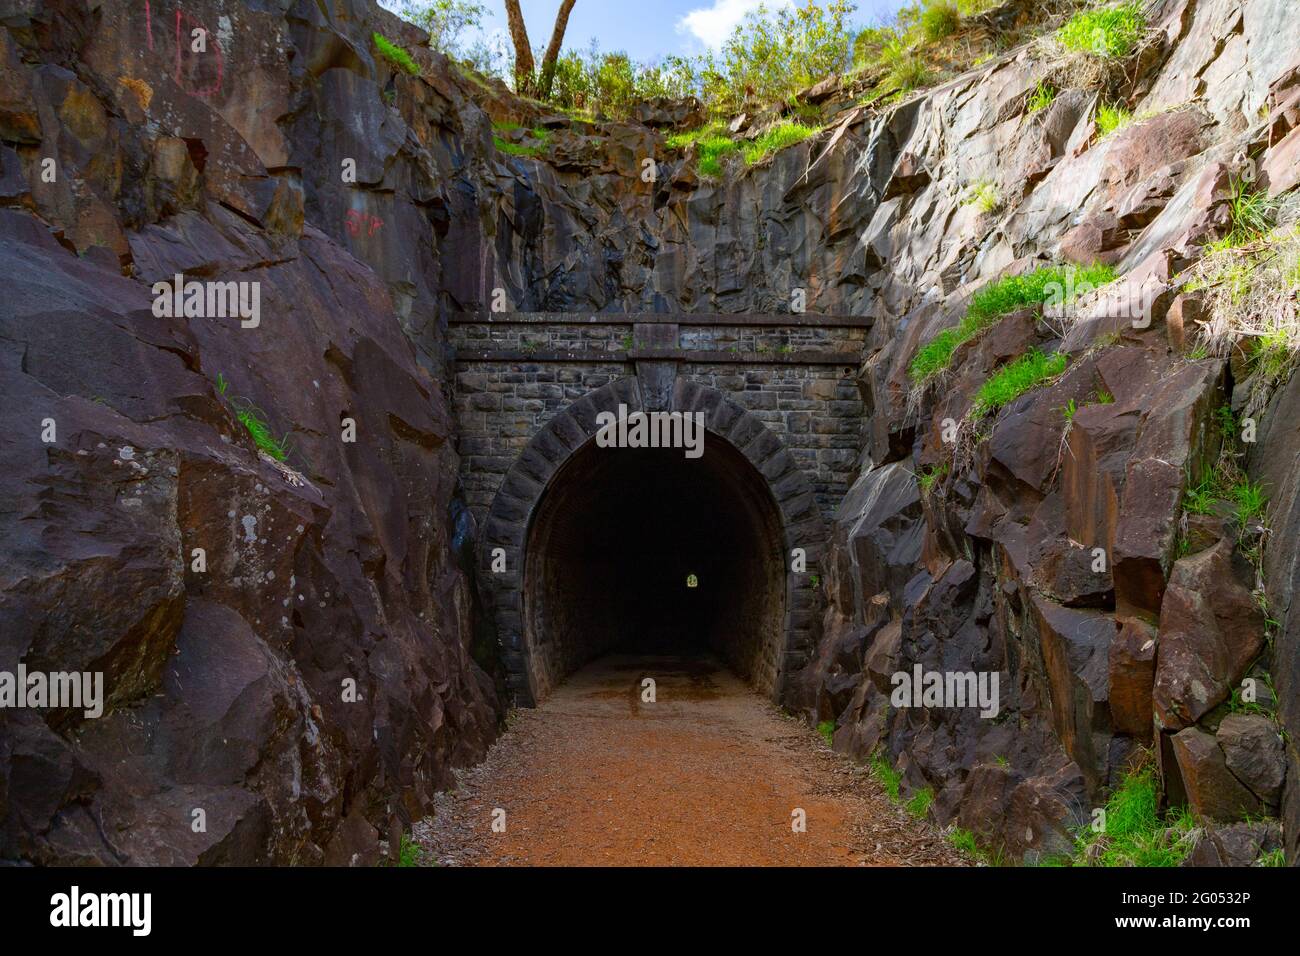 Swan View Tunnel in John Forrest National Park was opened for railway traffic in 1896 as a part of alignment of Eastern Railway and closed 1966. Stock Photo